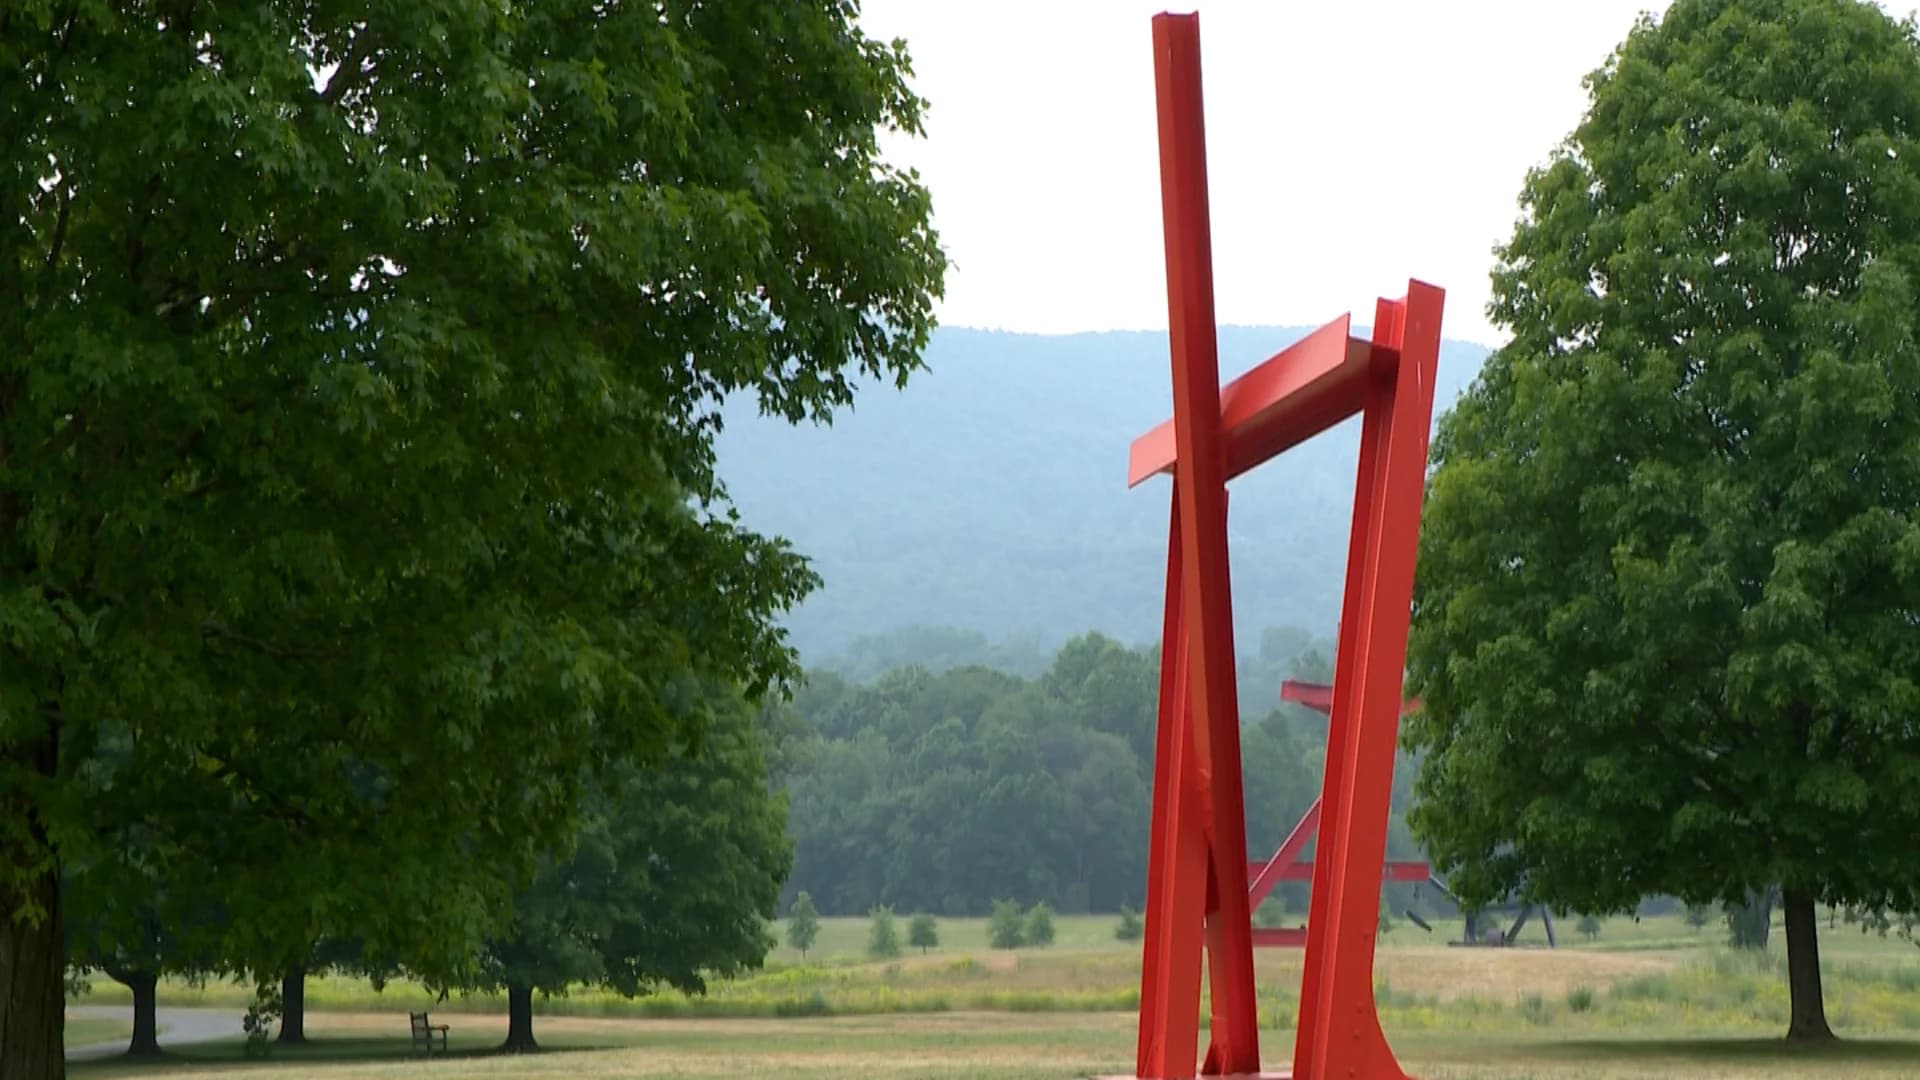 Gov. Hochul visits Storm King Art Center to announce $11 million in funding 